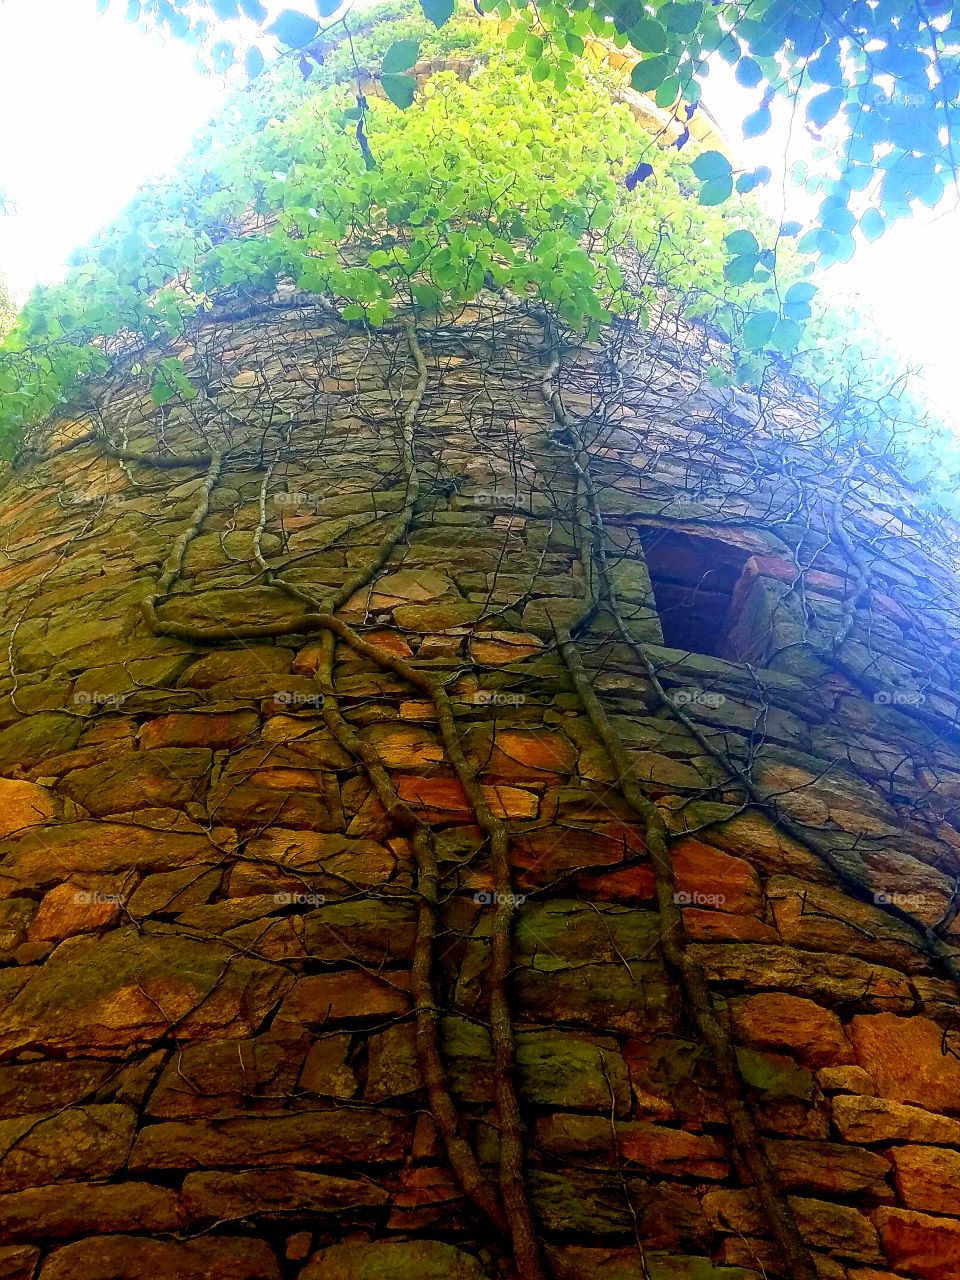 vines climbing up old stone tower, view from underneath